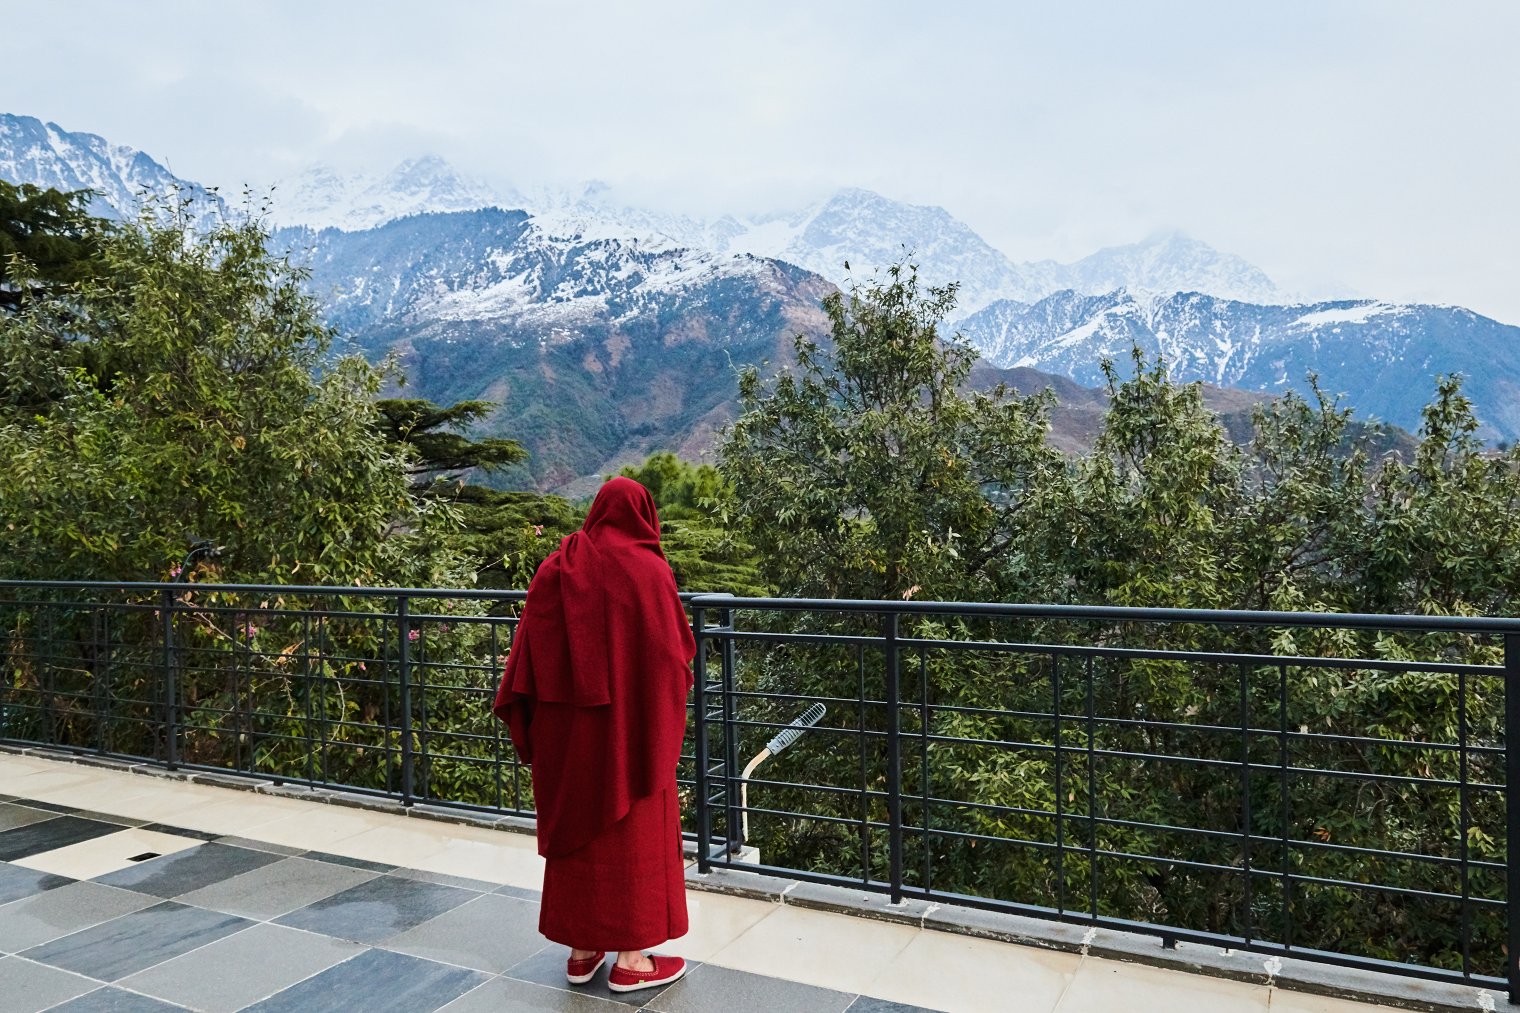 Six decades on, the Dalai Lama still hopes he will visit his birthplace again.